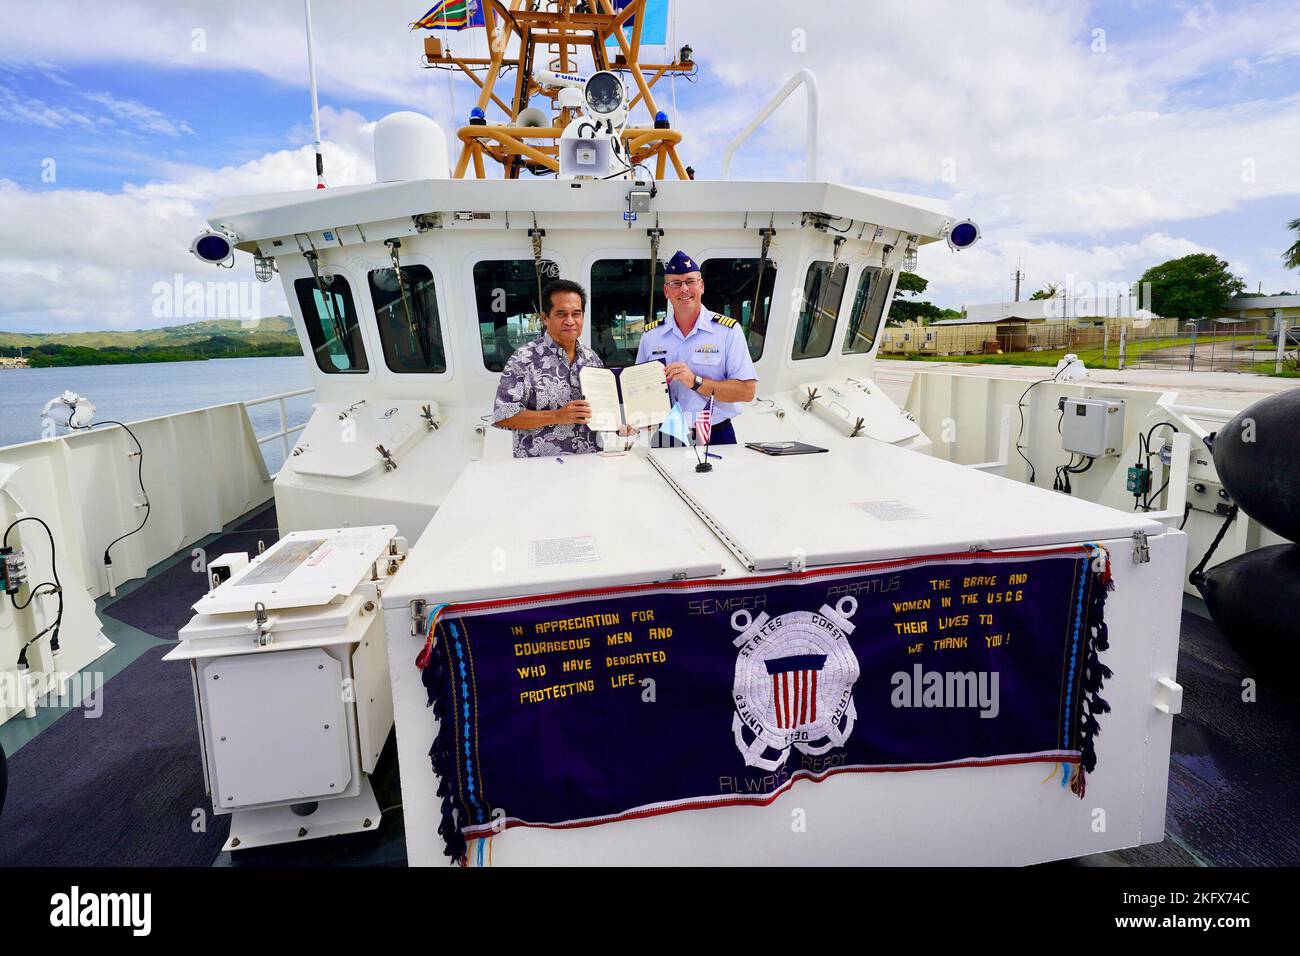 U.S. Coast Guard Forces Micronesia Sector Guam Commander Capt. Nicholas R. Simmons and the Honorable Joses R. Gallen, Secretary of Justice, Federated States of Micronesia, signed an expanded shiprider agreement allowing remote coordination of authorities, the first of its kind aboard the USCGC Myrtle Hazard (WPC 1139) in Guam, on Oct. 13, 2022. The agreement will enable to U.S to act on behalf of the FSM to combat illicit maritime activity and to strengthen international security operations. The weaving displayed is called a Thur, a cultural textile never worn as an everyday item of dress but Stock Photo